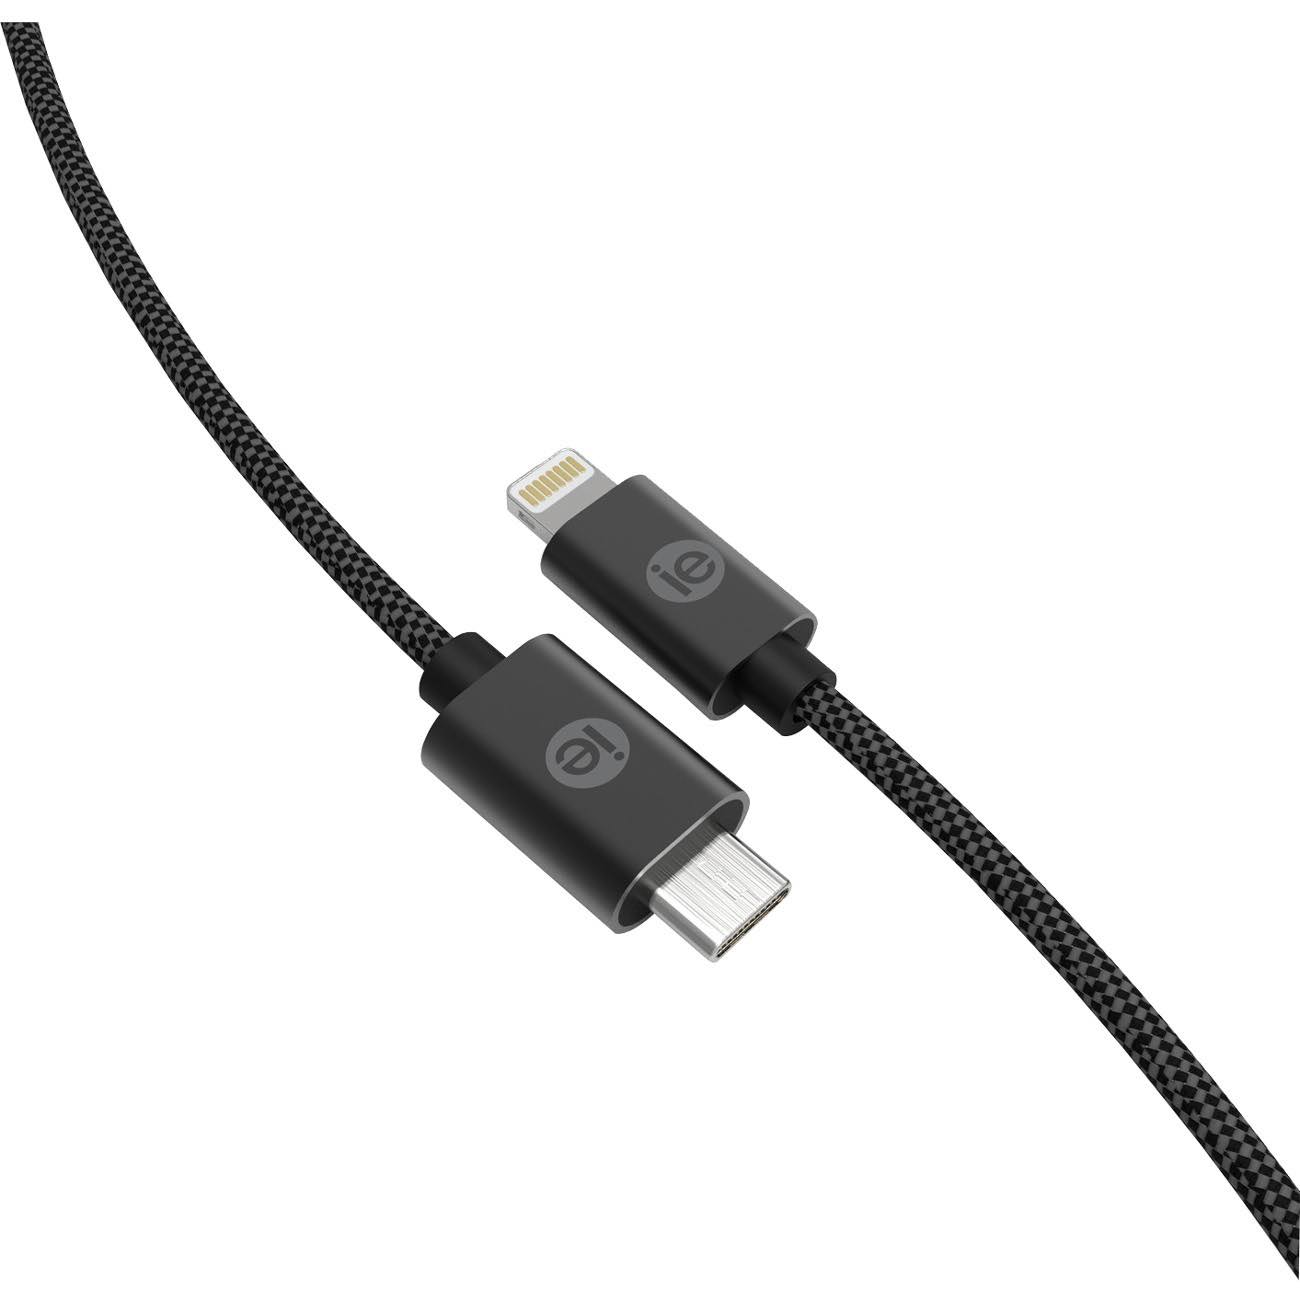 Iessentials Braided USB-C to Lightning Cable 6 Feet (Black)